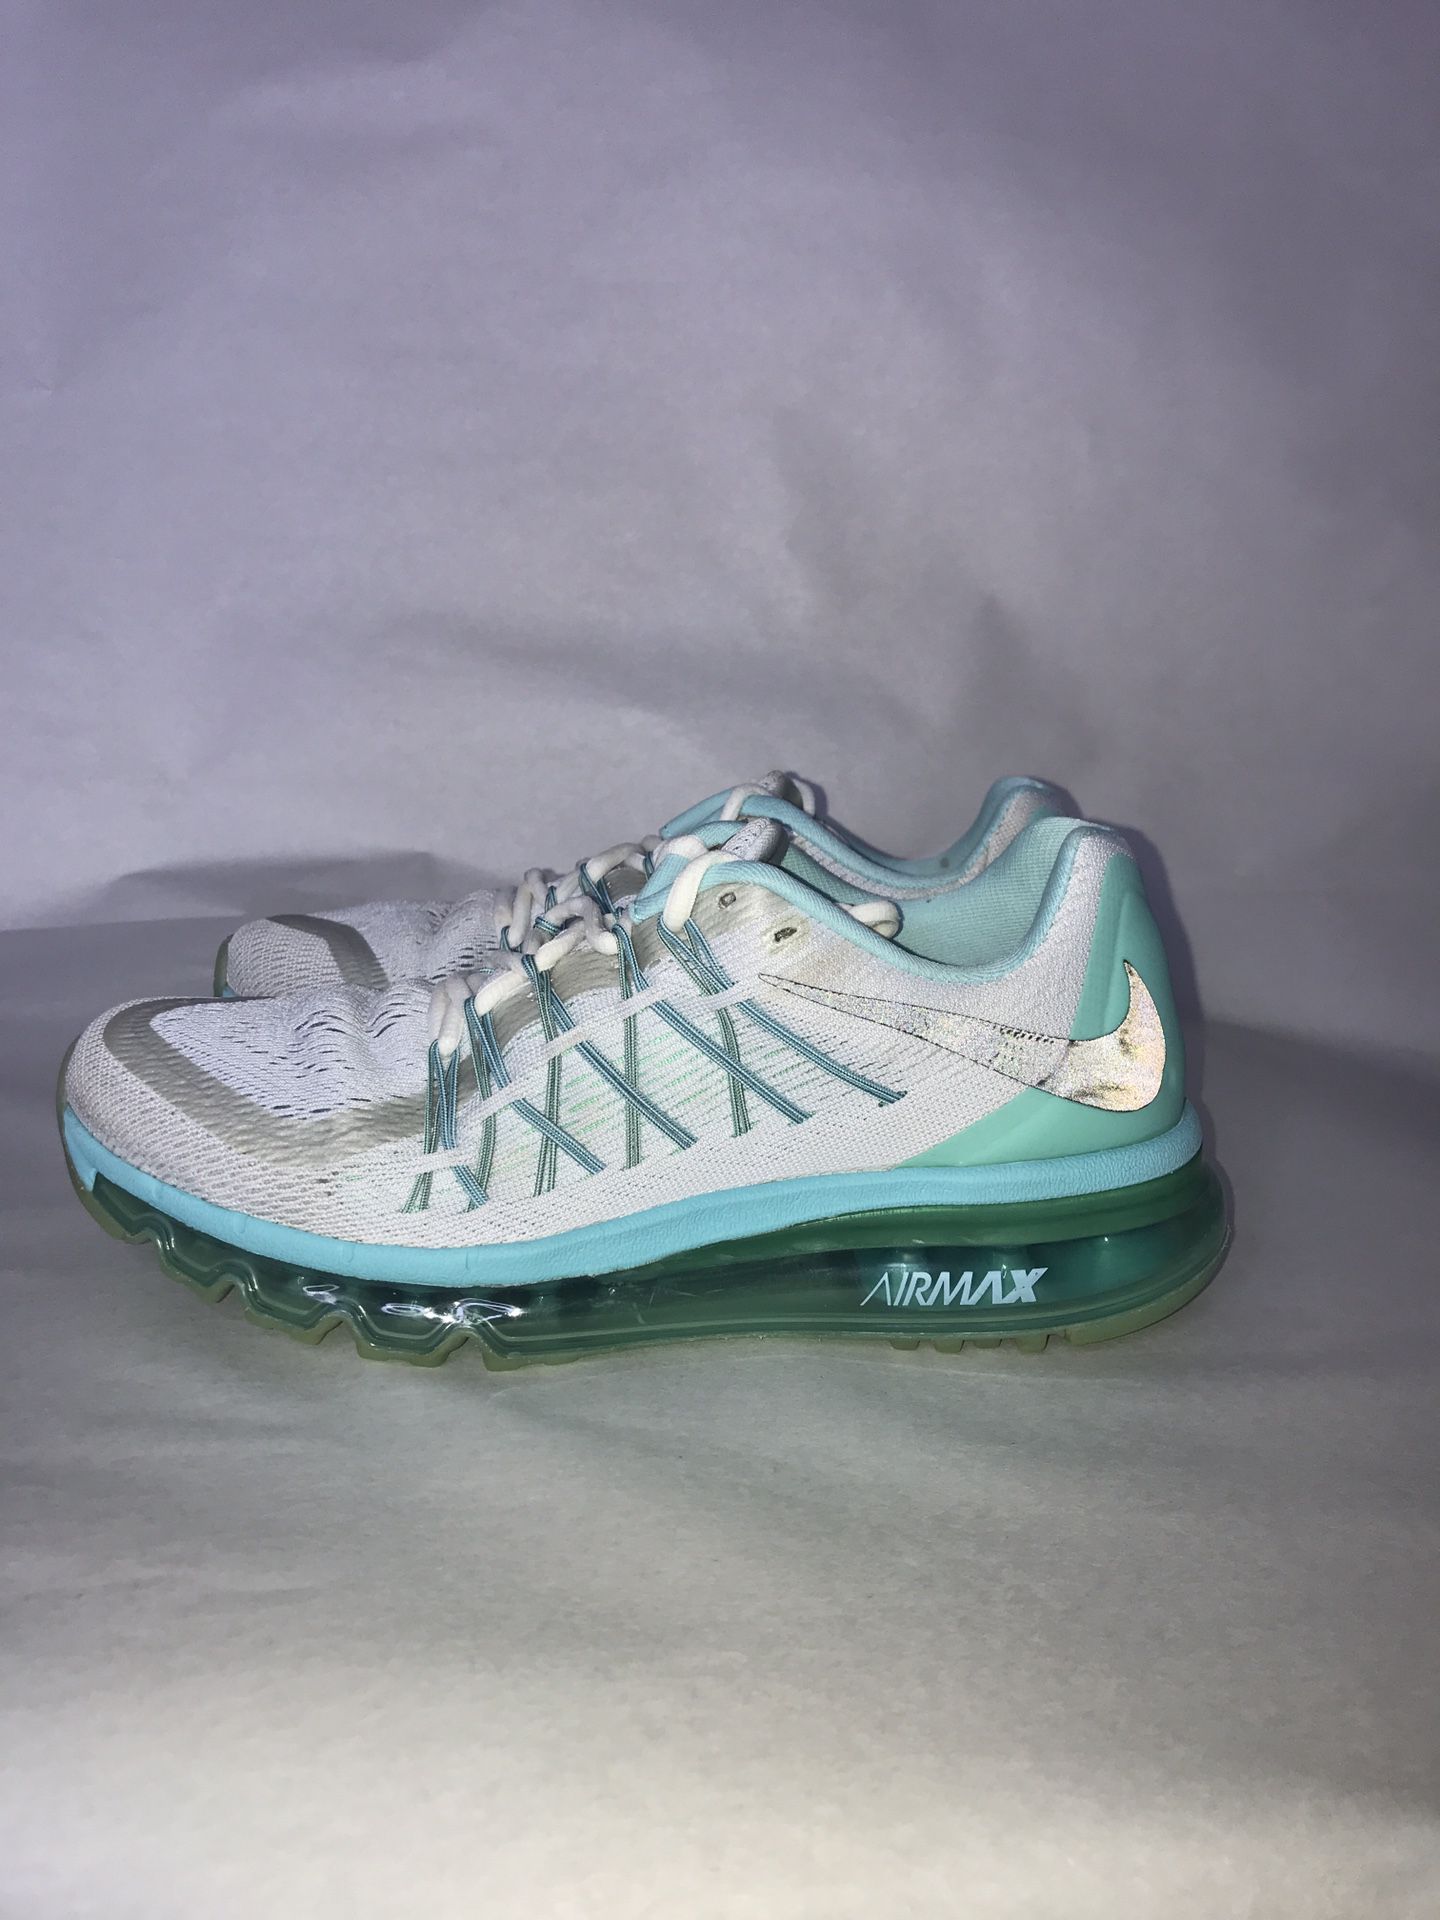 NIKE Air Max 698903-007 Sneaker Shoes White Teal (Size 7.5) T-9